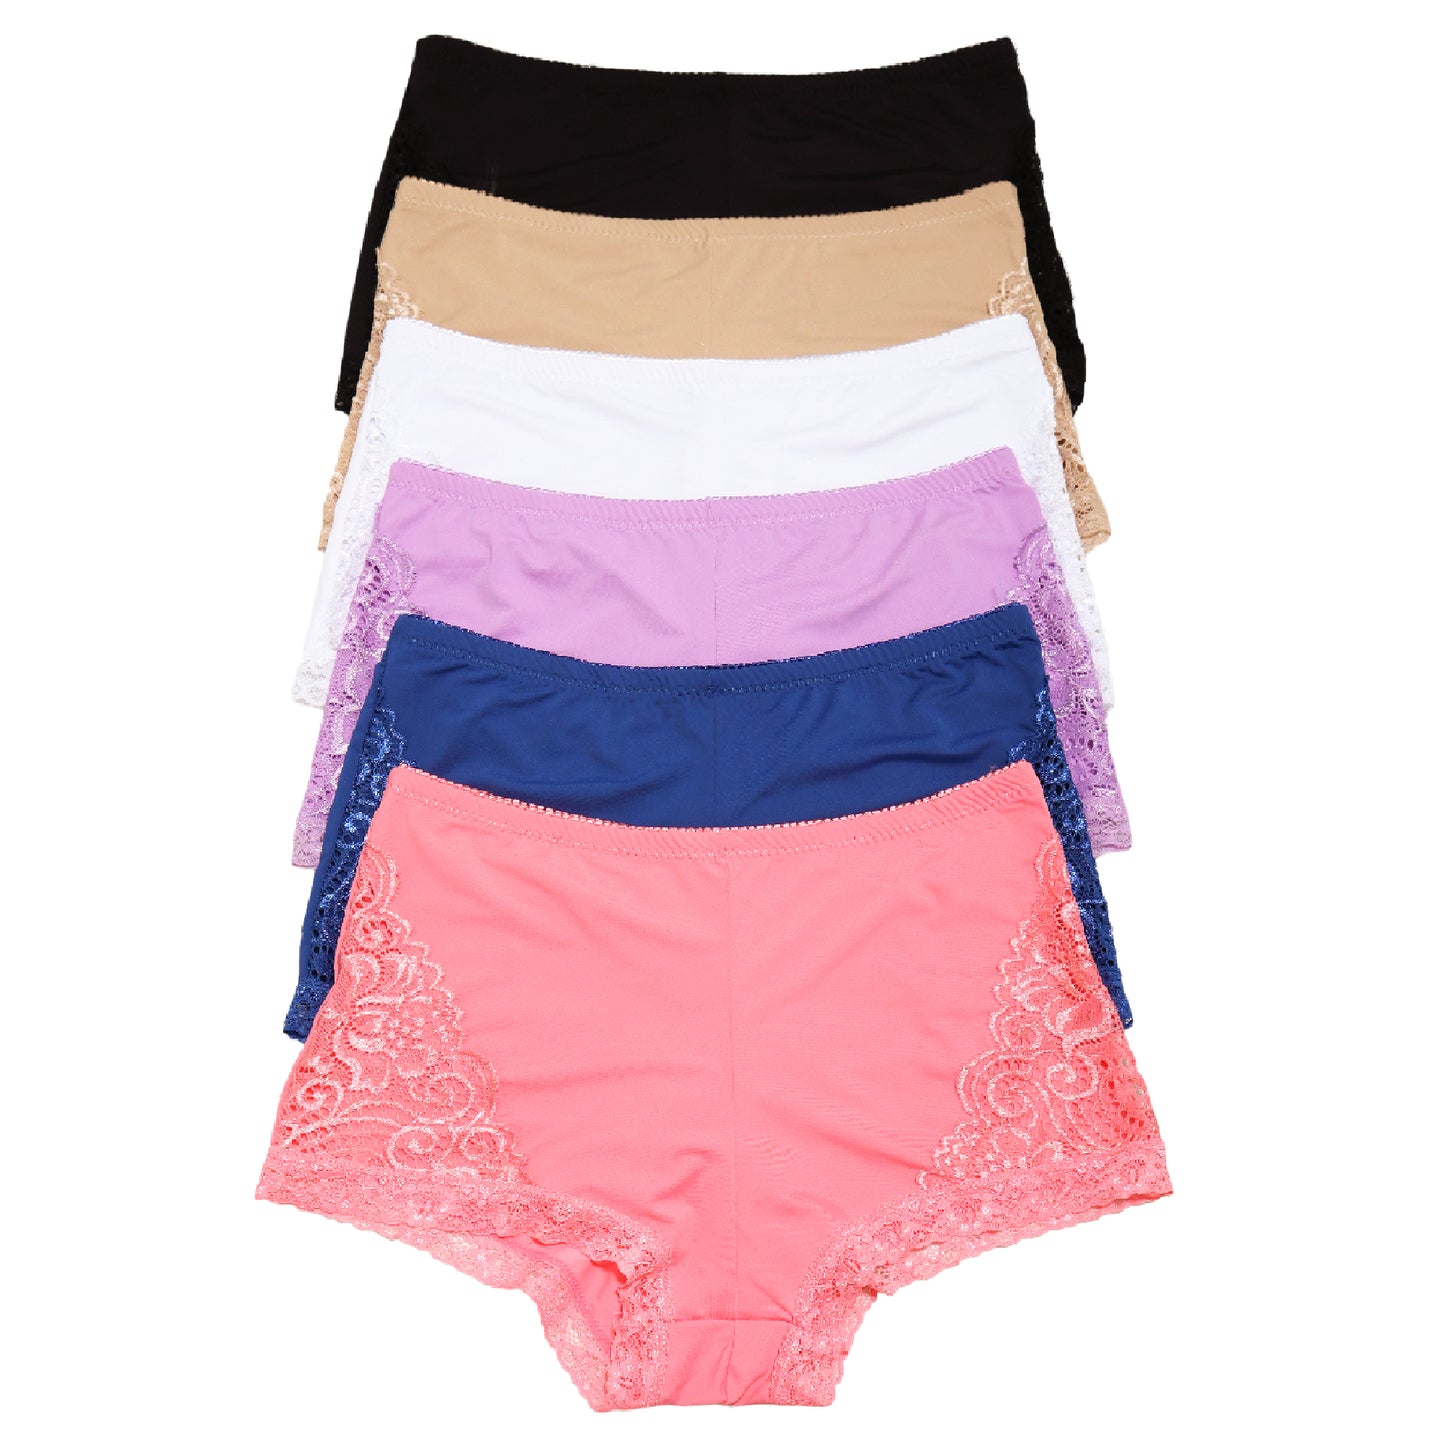 Angelina Boyshort Panties with Side Lace Accent Design (6 or 12 Pack), #G935